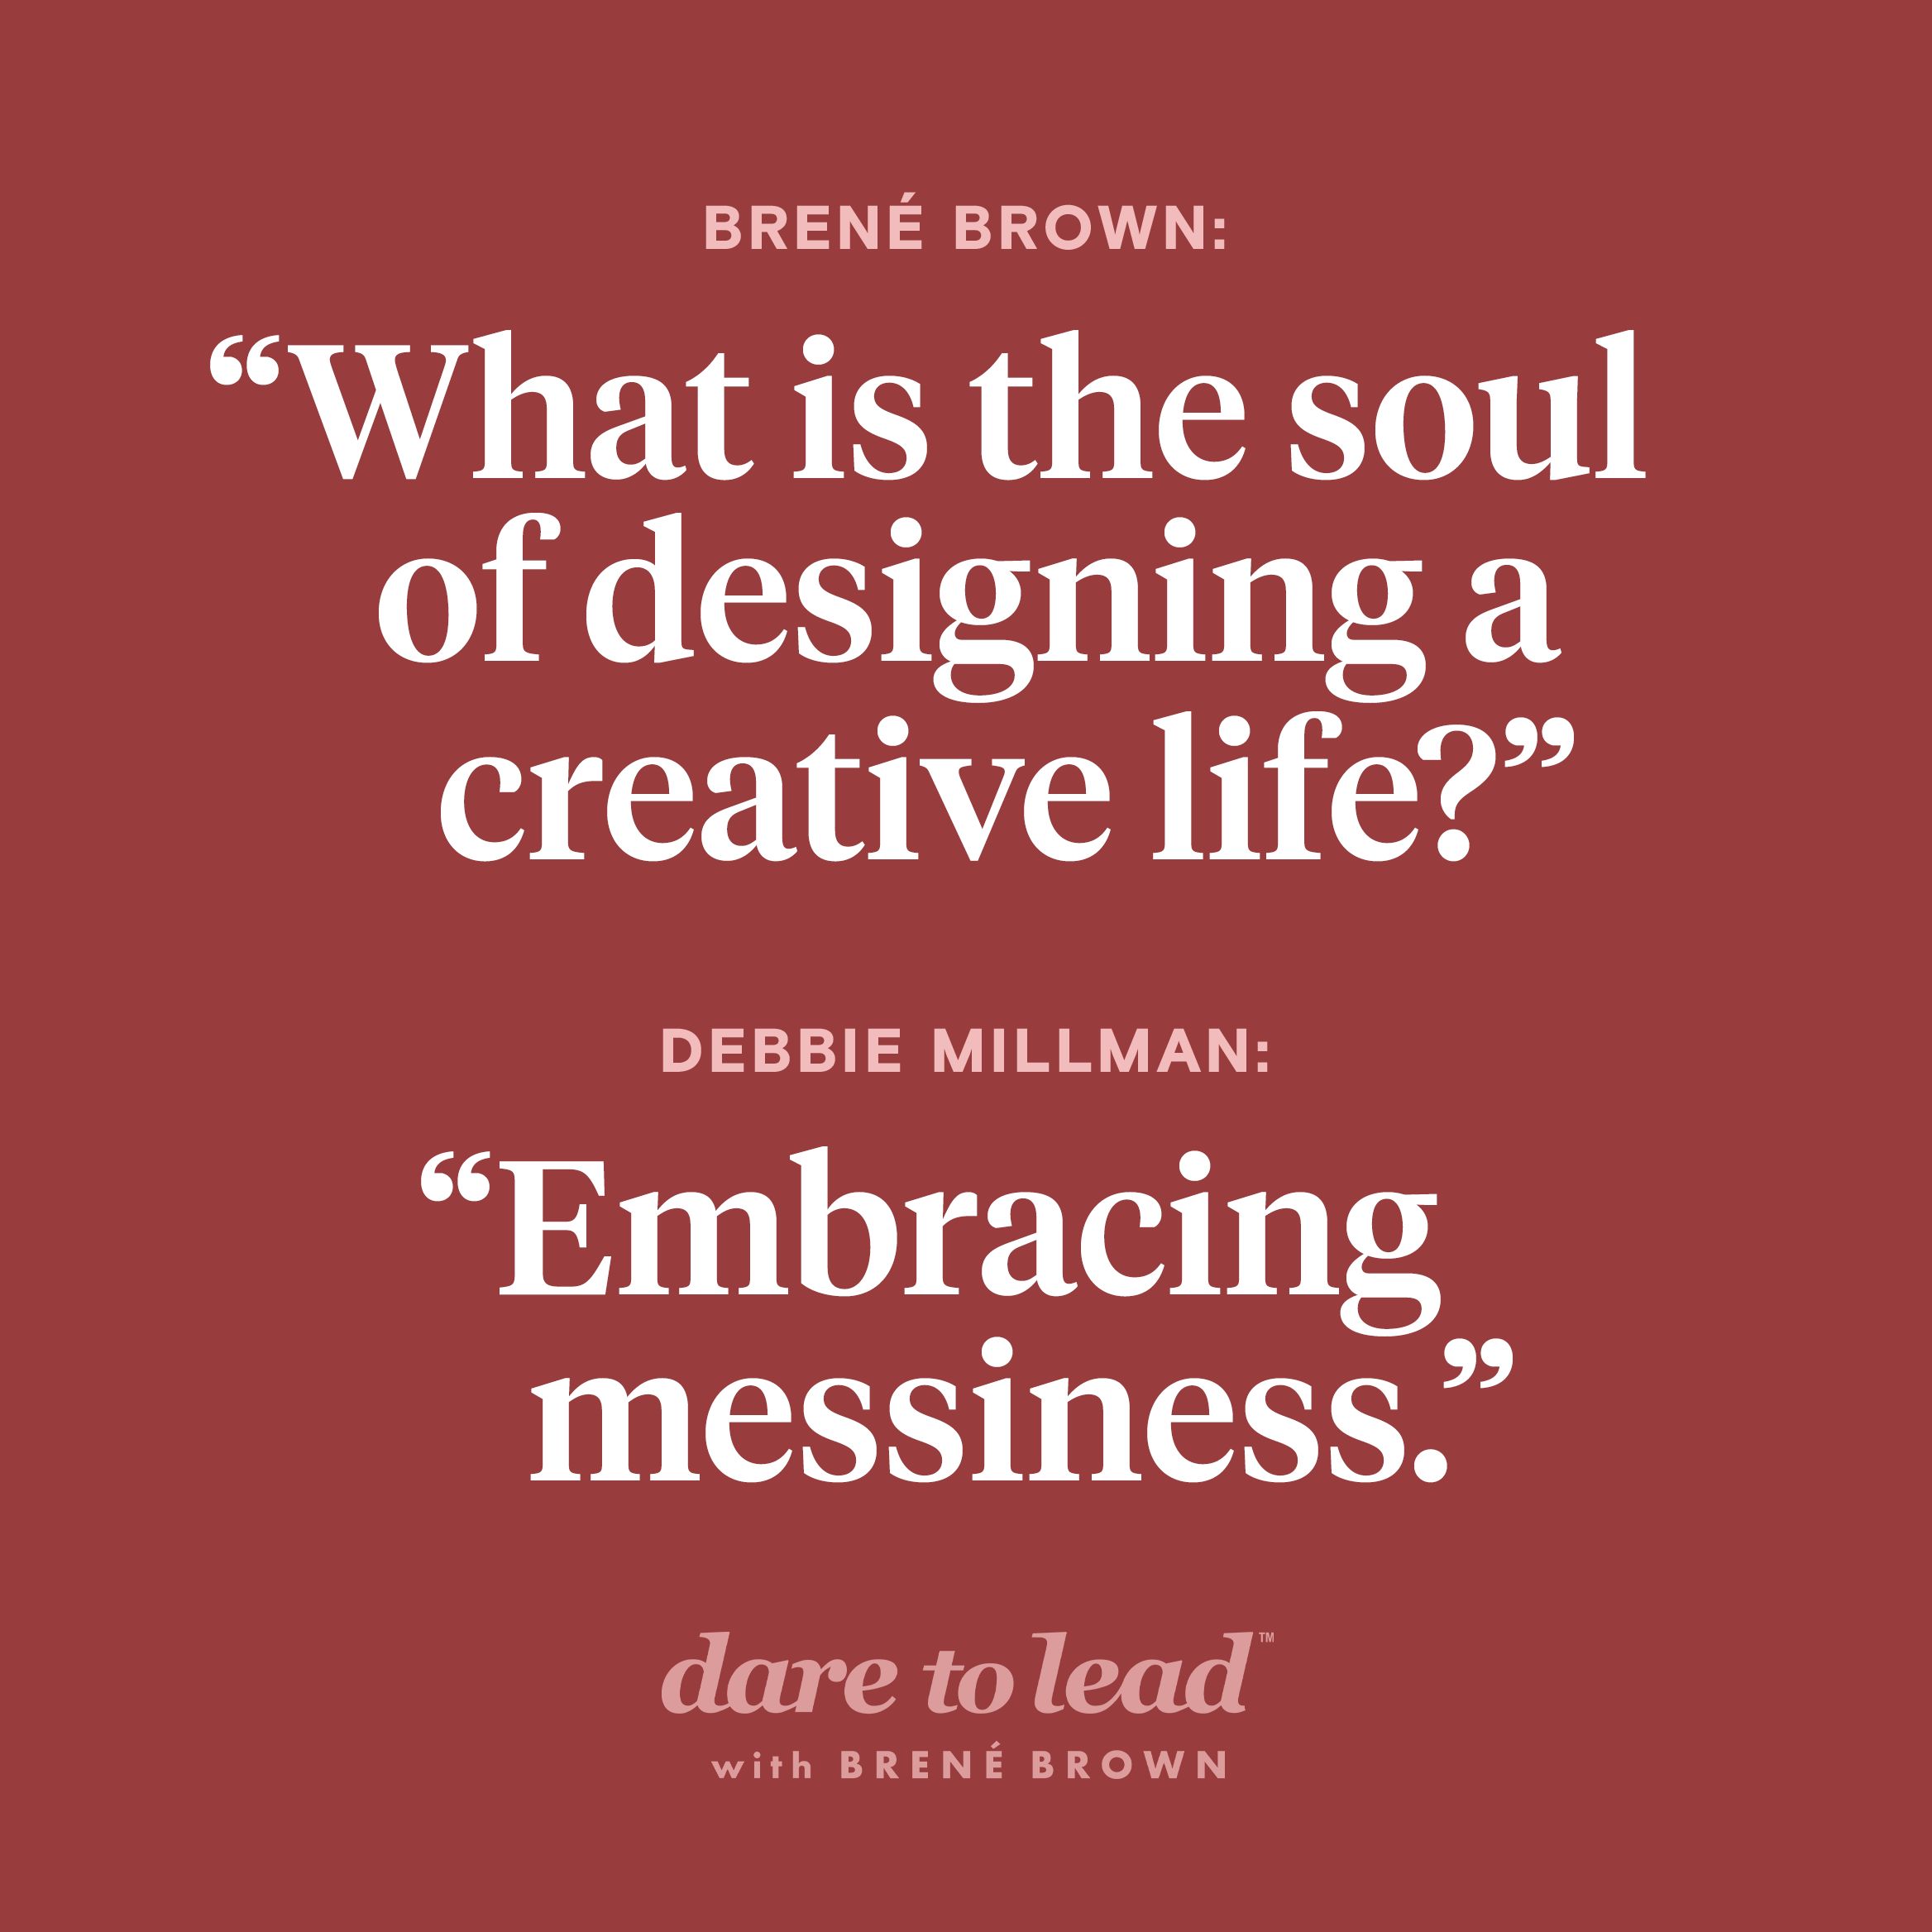 A quote from Debbie Millman on designing a creative life